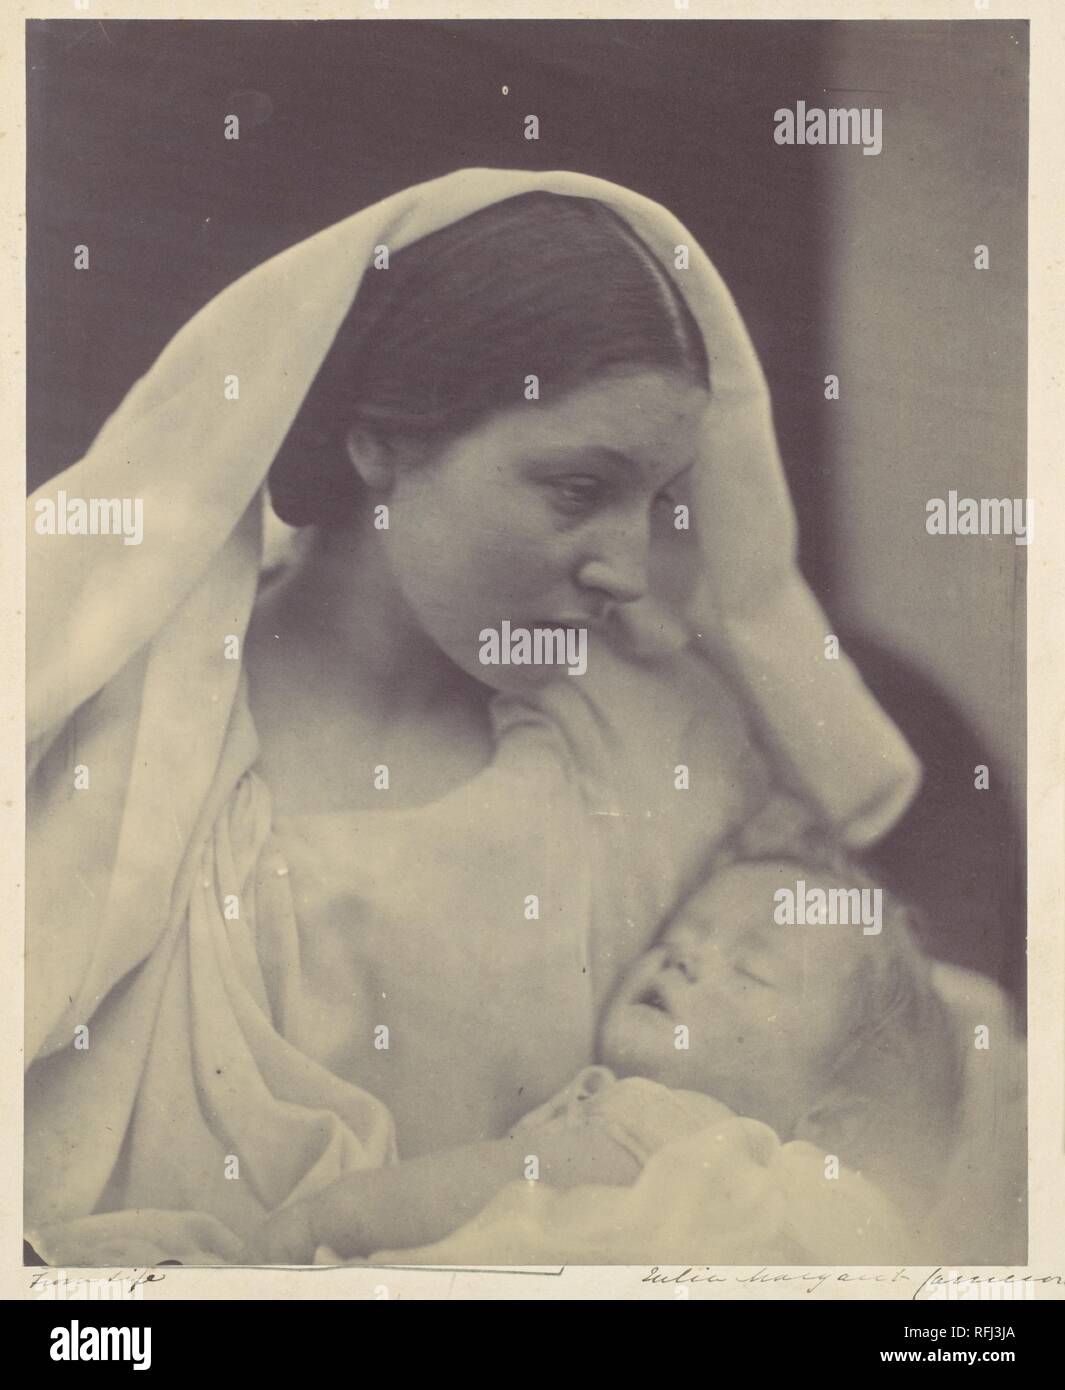 La Madonna Riposata. Artist: Julia Margaret Cameron (British (born India), Calcutta 1815-1879 Kalutara, Ceylon). Date: 1865.  In the first two years of Cameron's photography, religious themes held an important place alongside portraiture. The remarkably expressive and emotionally versatile Mary Hillier was often cast as the Virgin Mary, costumed and posed in scenes reminiscent of Italian painting. The close physical and spiritual bond of mother and child that is illustrated so vividly in these pictures may have been especially poignant for Cameron. She was, after all, given her first camera at Stock Photo